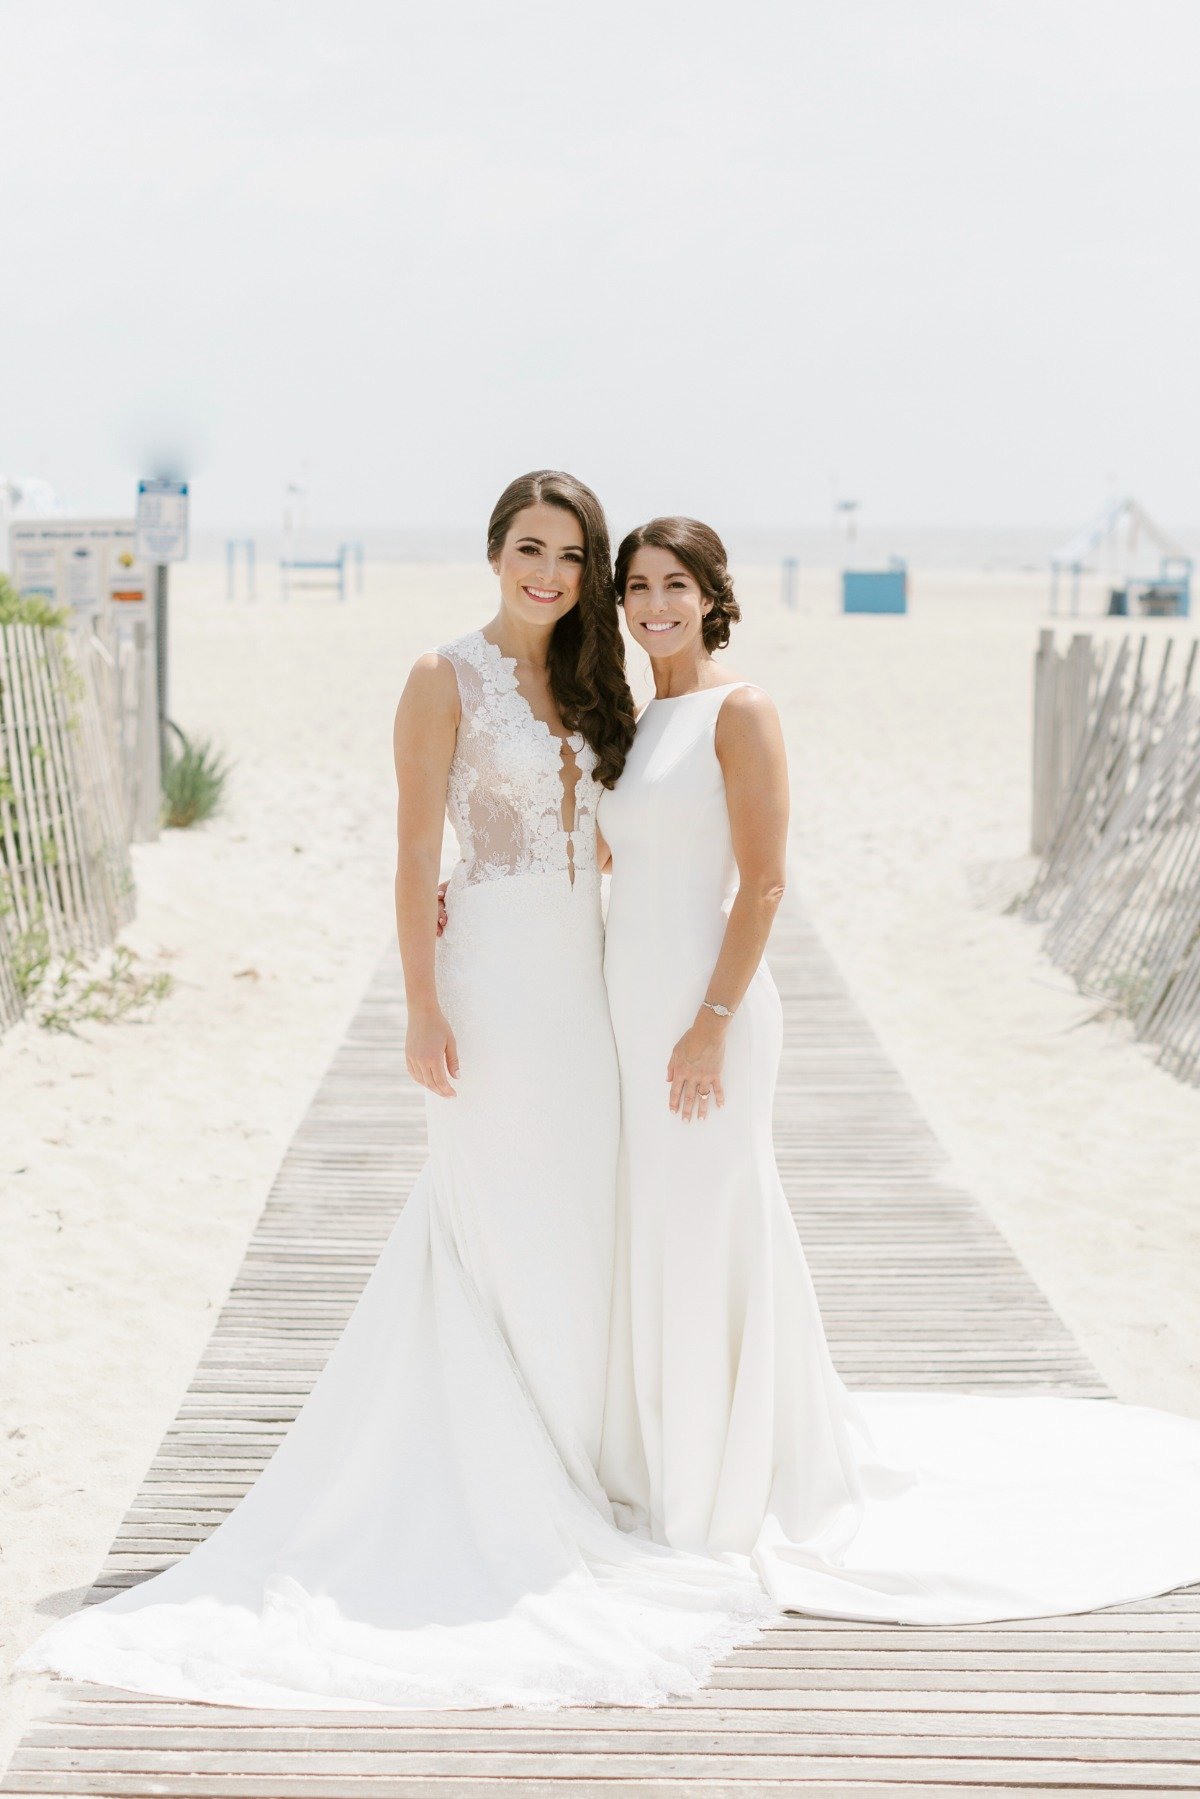 Cape May is Pretty in Pink for This Classic Seaside Wedding